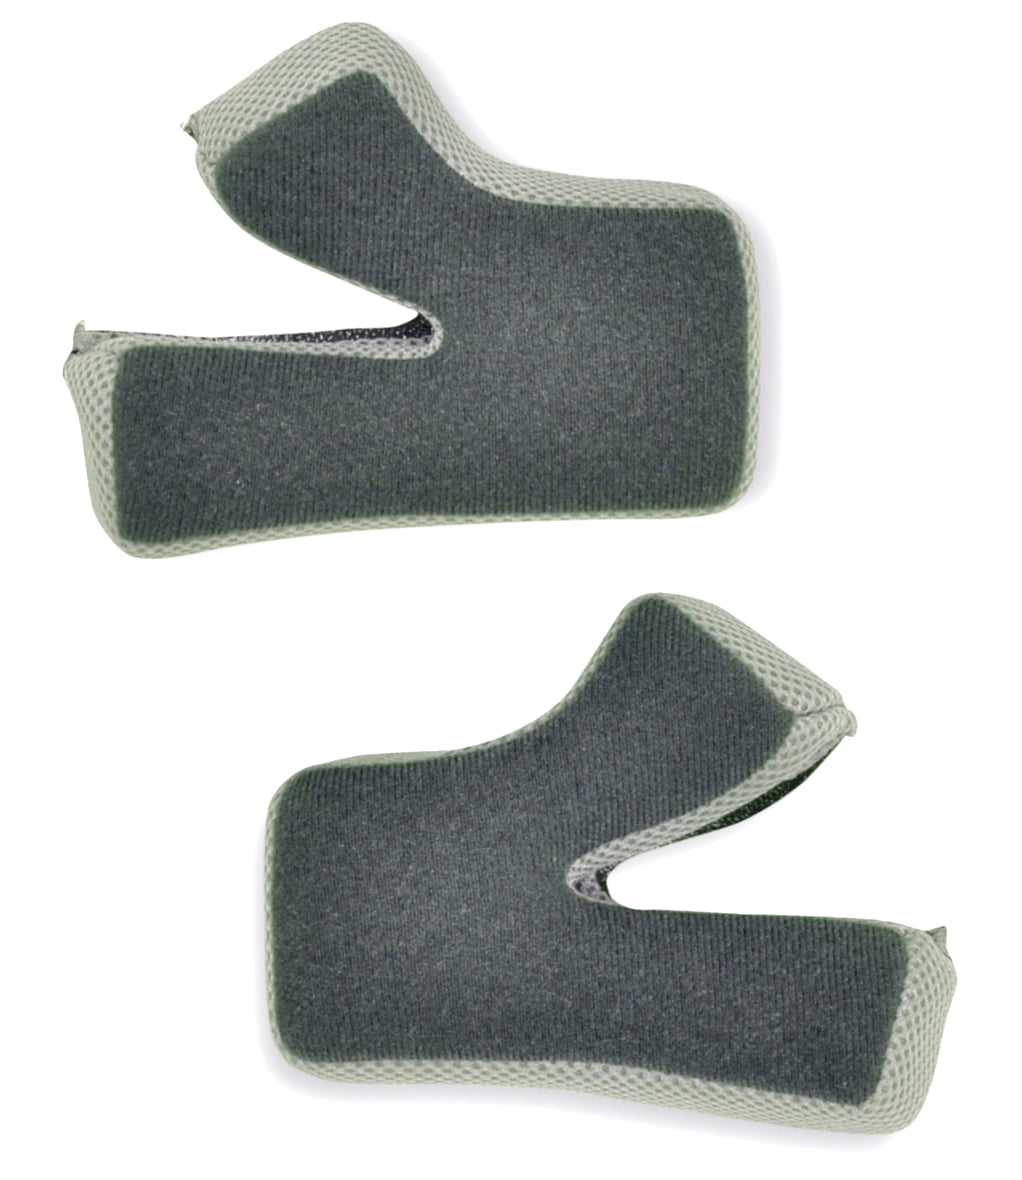 Sm 0134-0811 Multi AFX Cheek Pads for FX-17Y Youth Helmet 